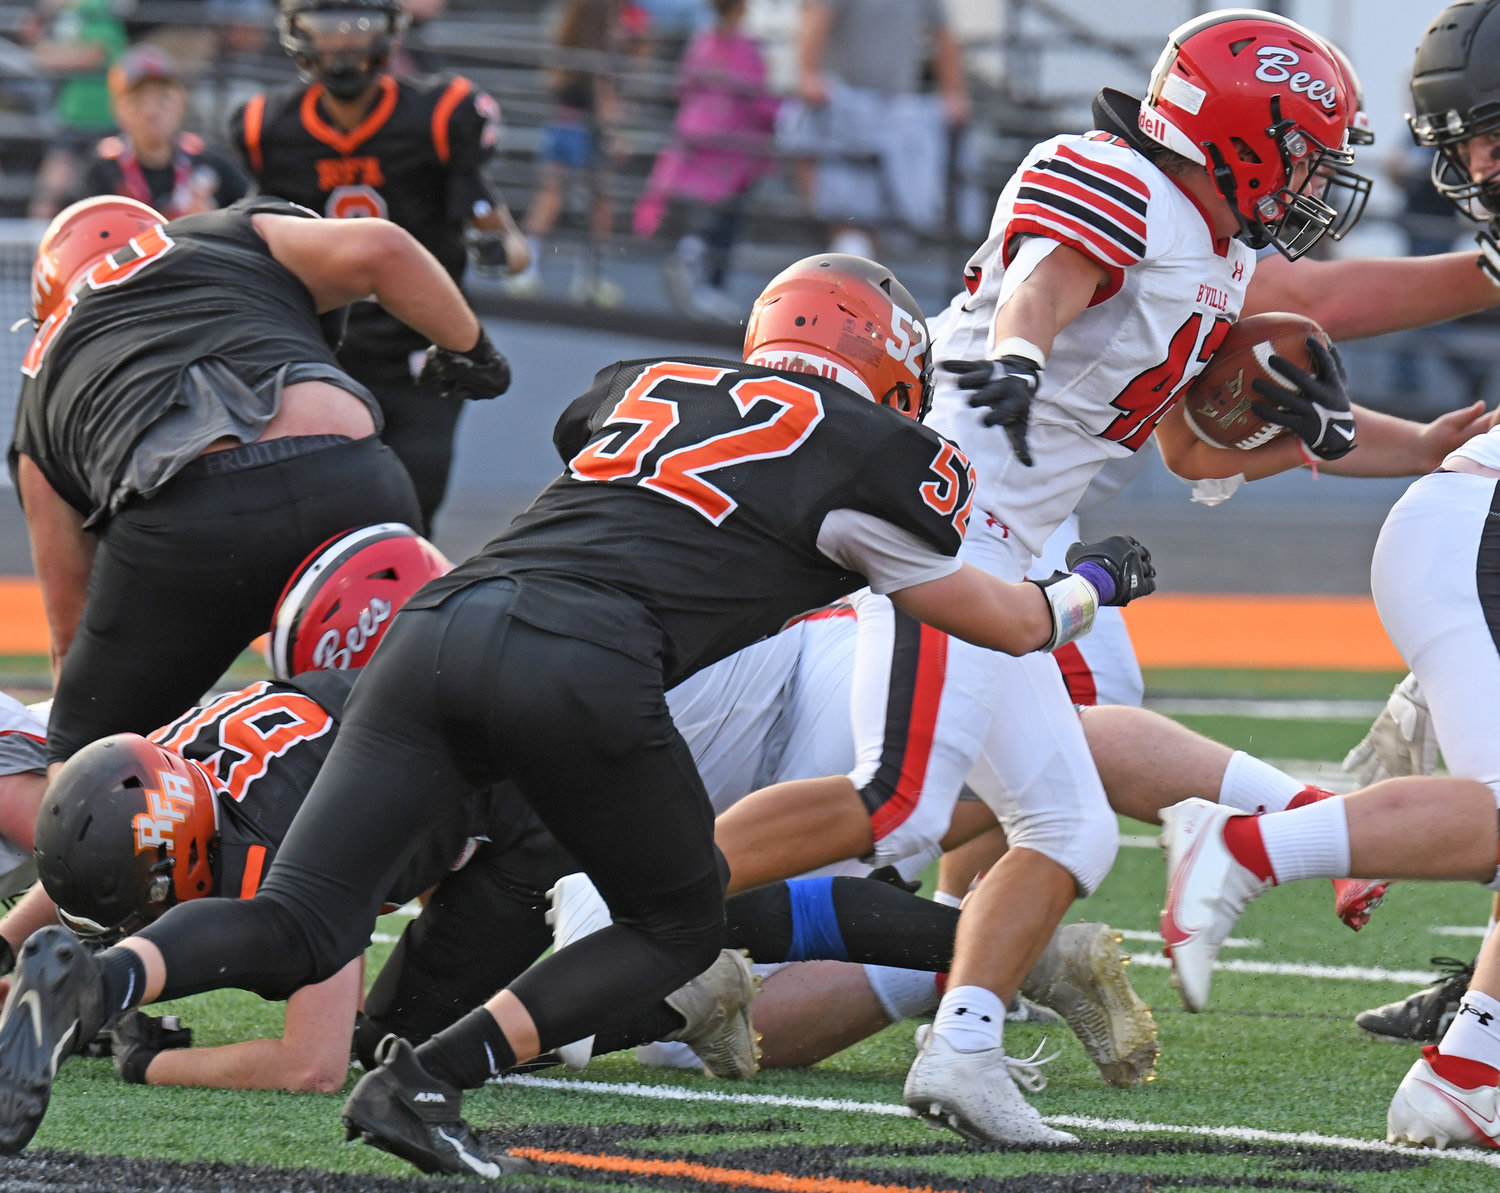 Josiah Holmes of Rome Free Academy tries to wrap up Baldwinsville fullback Nicholas Foster in the first quarter Friday night at RFA Stadium. The Bees won 55-13.